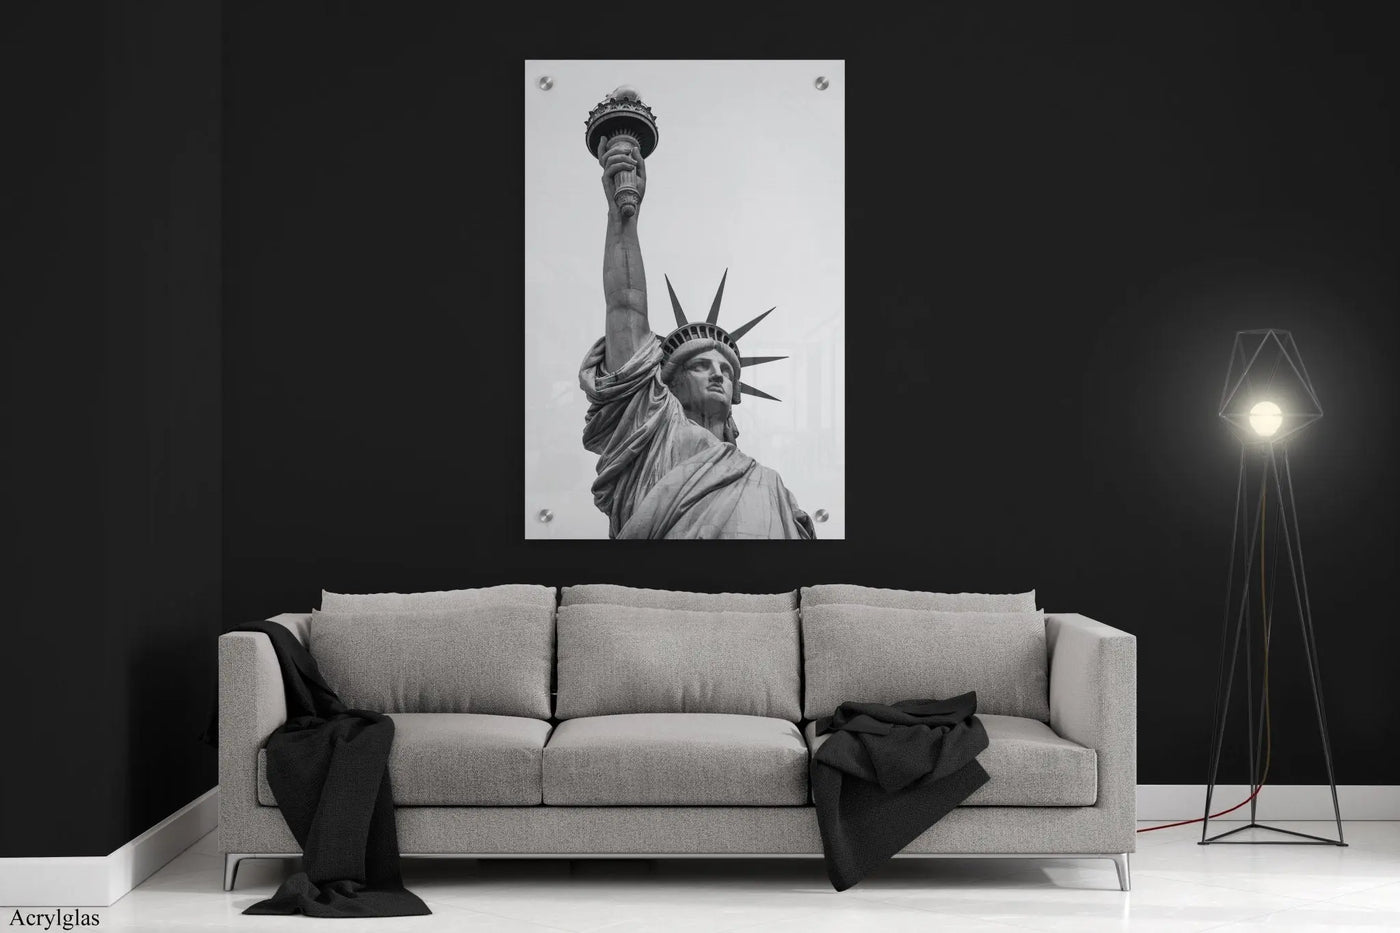 "STATUE OF LIBERTY" - Art For Everyone